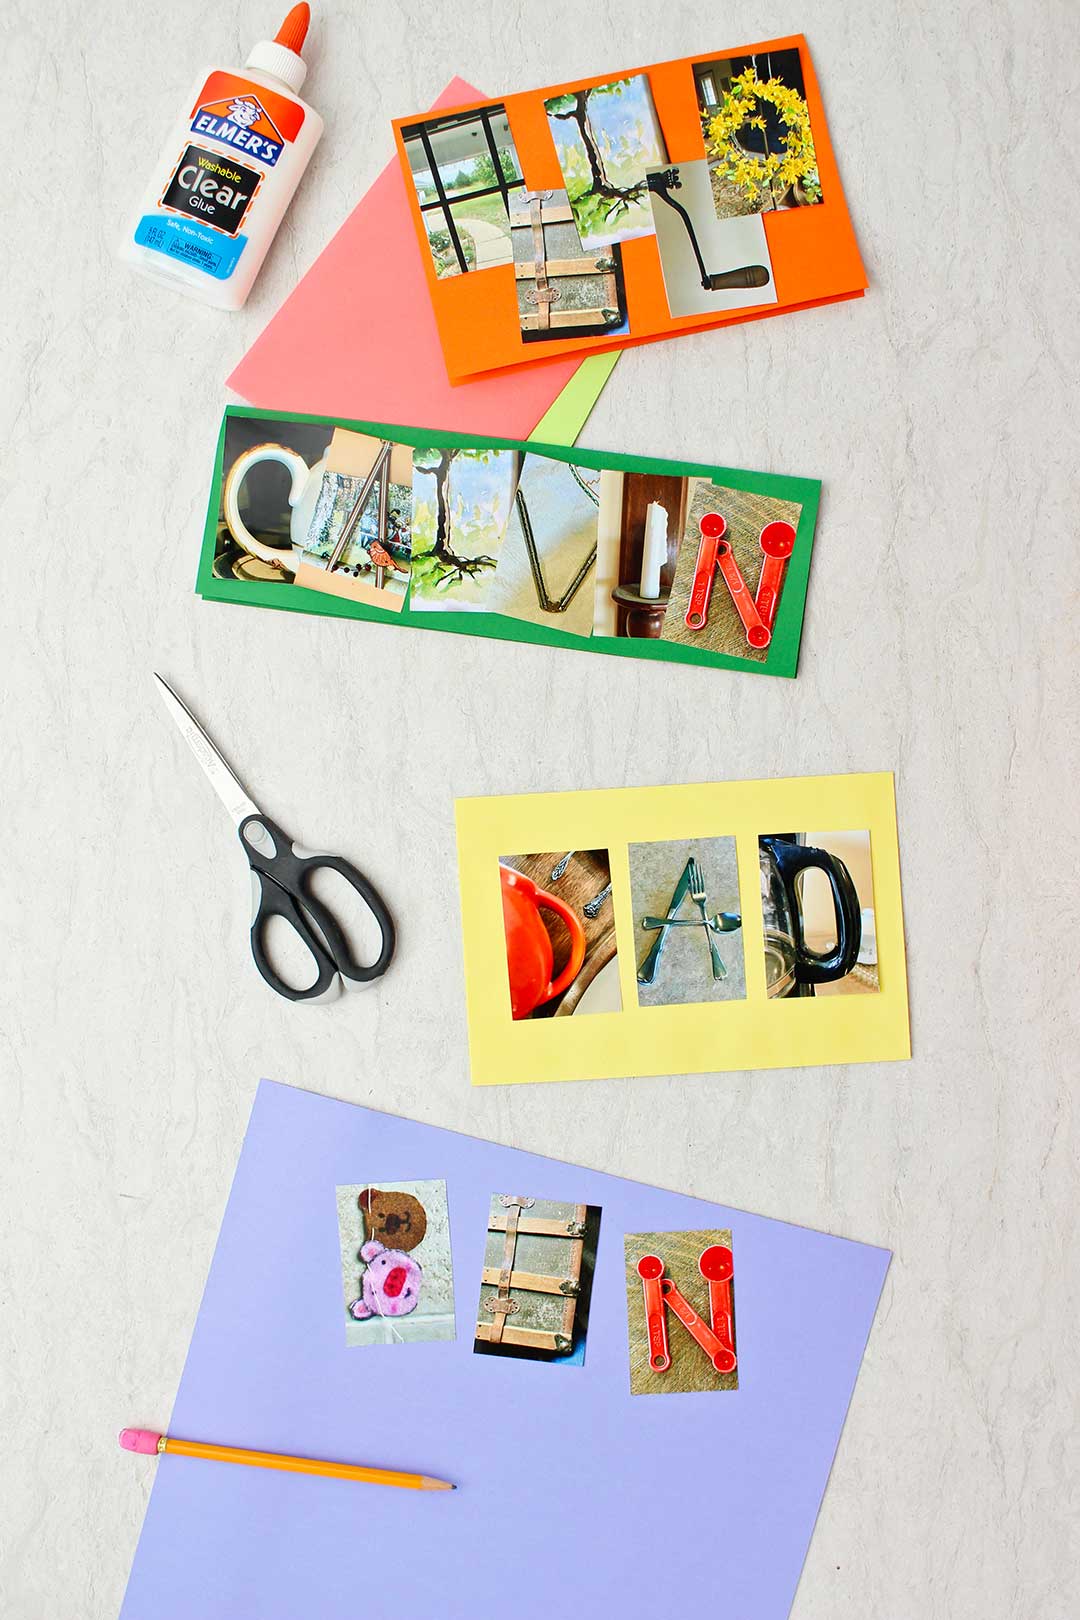 Three partially made photo cards on colorful paper. Cards spell "hello", "Calvin", "Dad" and "Ben"